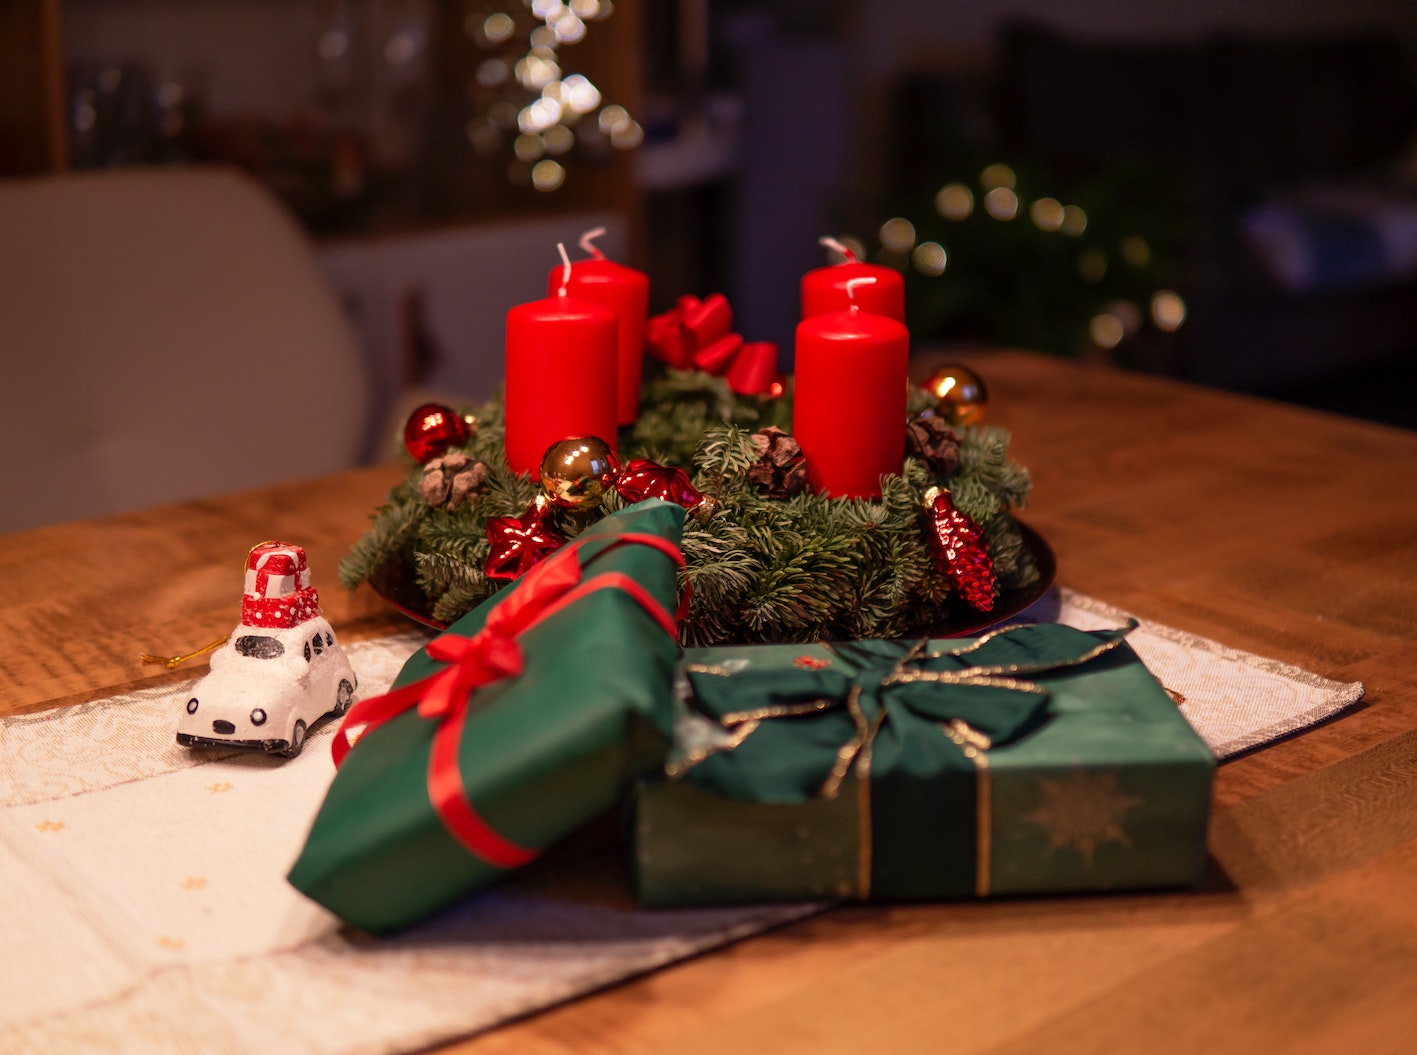 unlighted-red-advent-candles-on-table-beside-green-gift-1746191.jpg